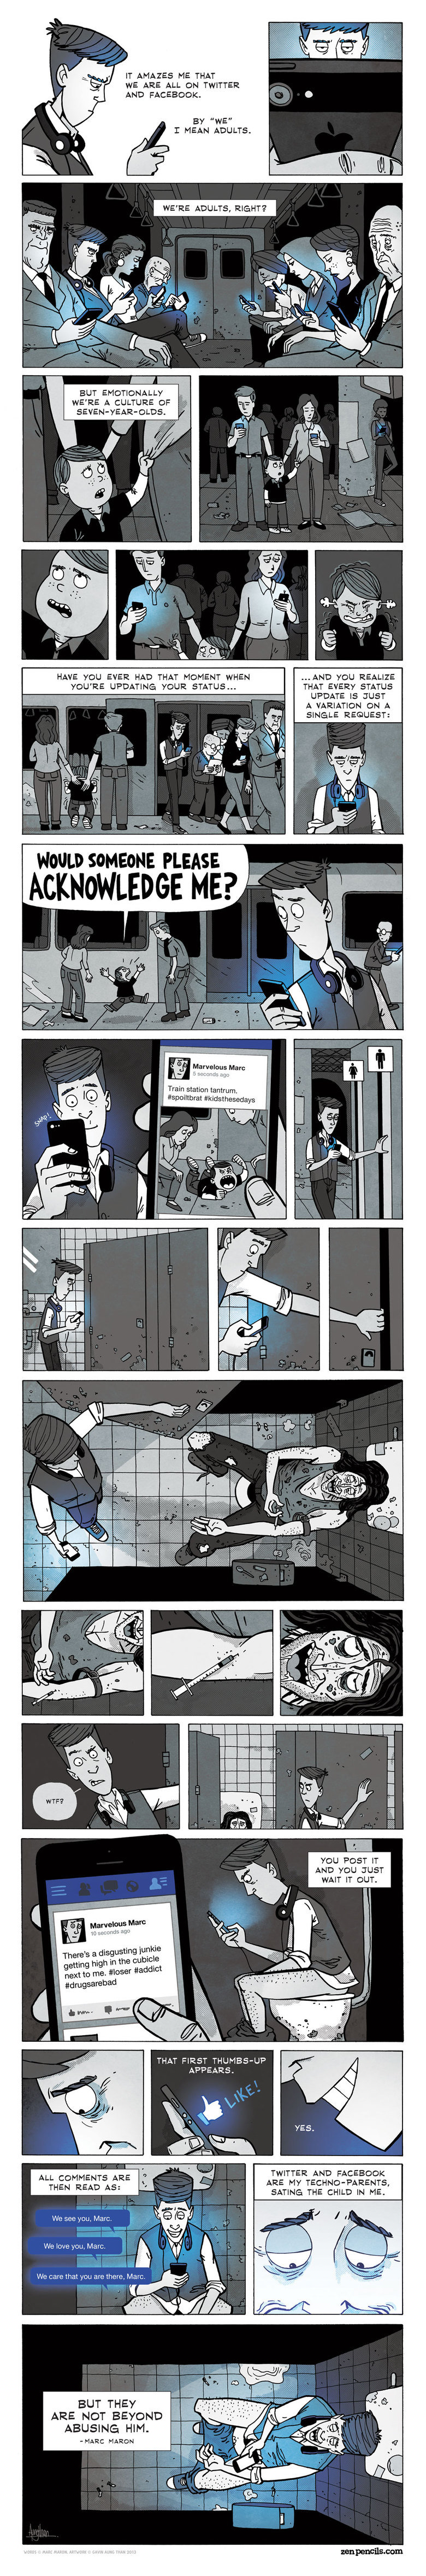 Ask Each Other Anything Within Reason - Page 9 Screw+me.+Taken+from+http+zenpencils.com_da5b36_4774663